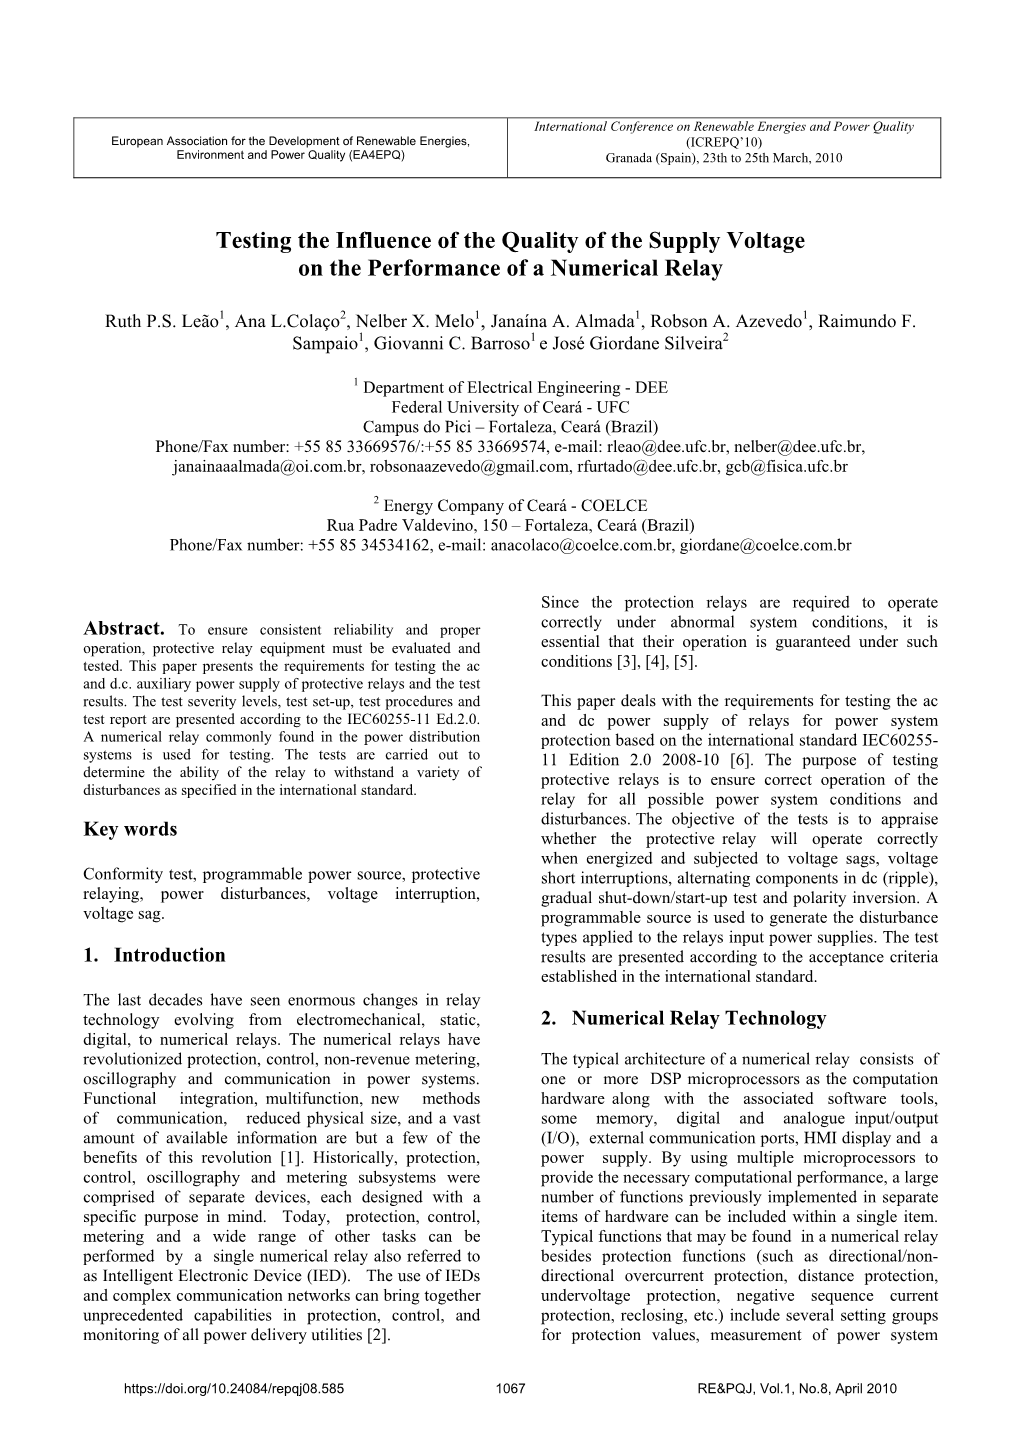 Testing the Influence of the Quality of the Supply Voltage on the Performance of a Numerical Relay